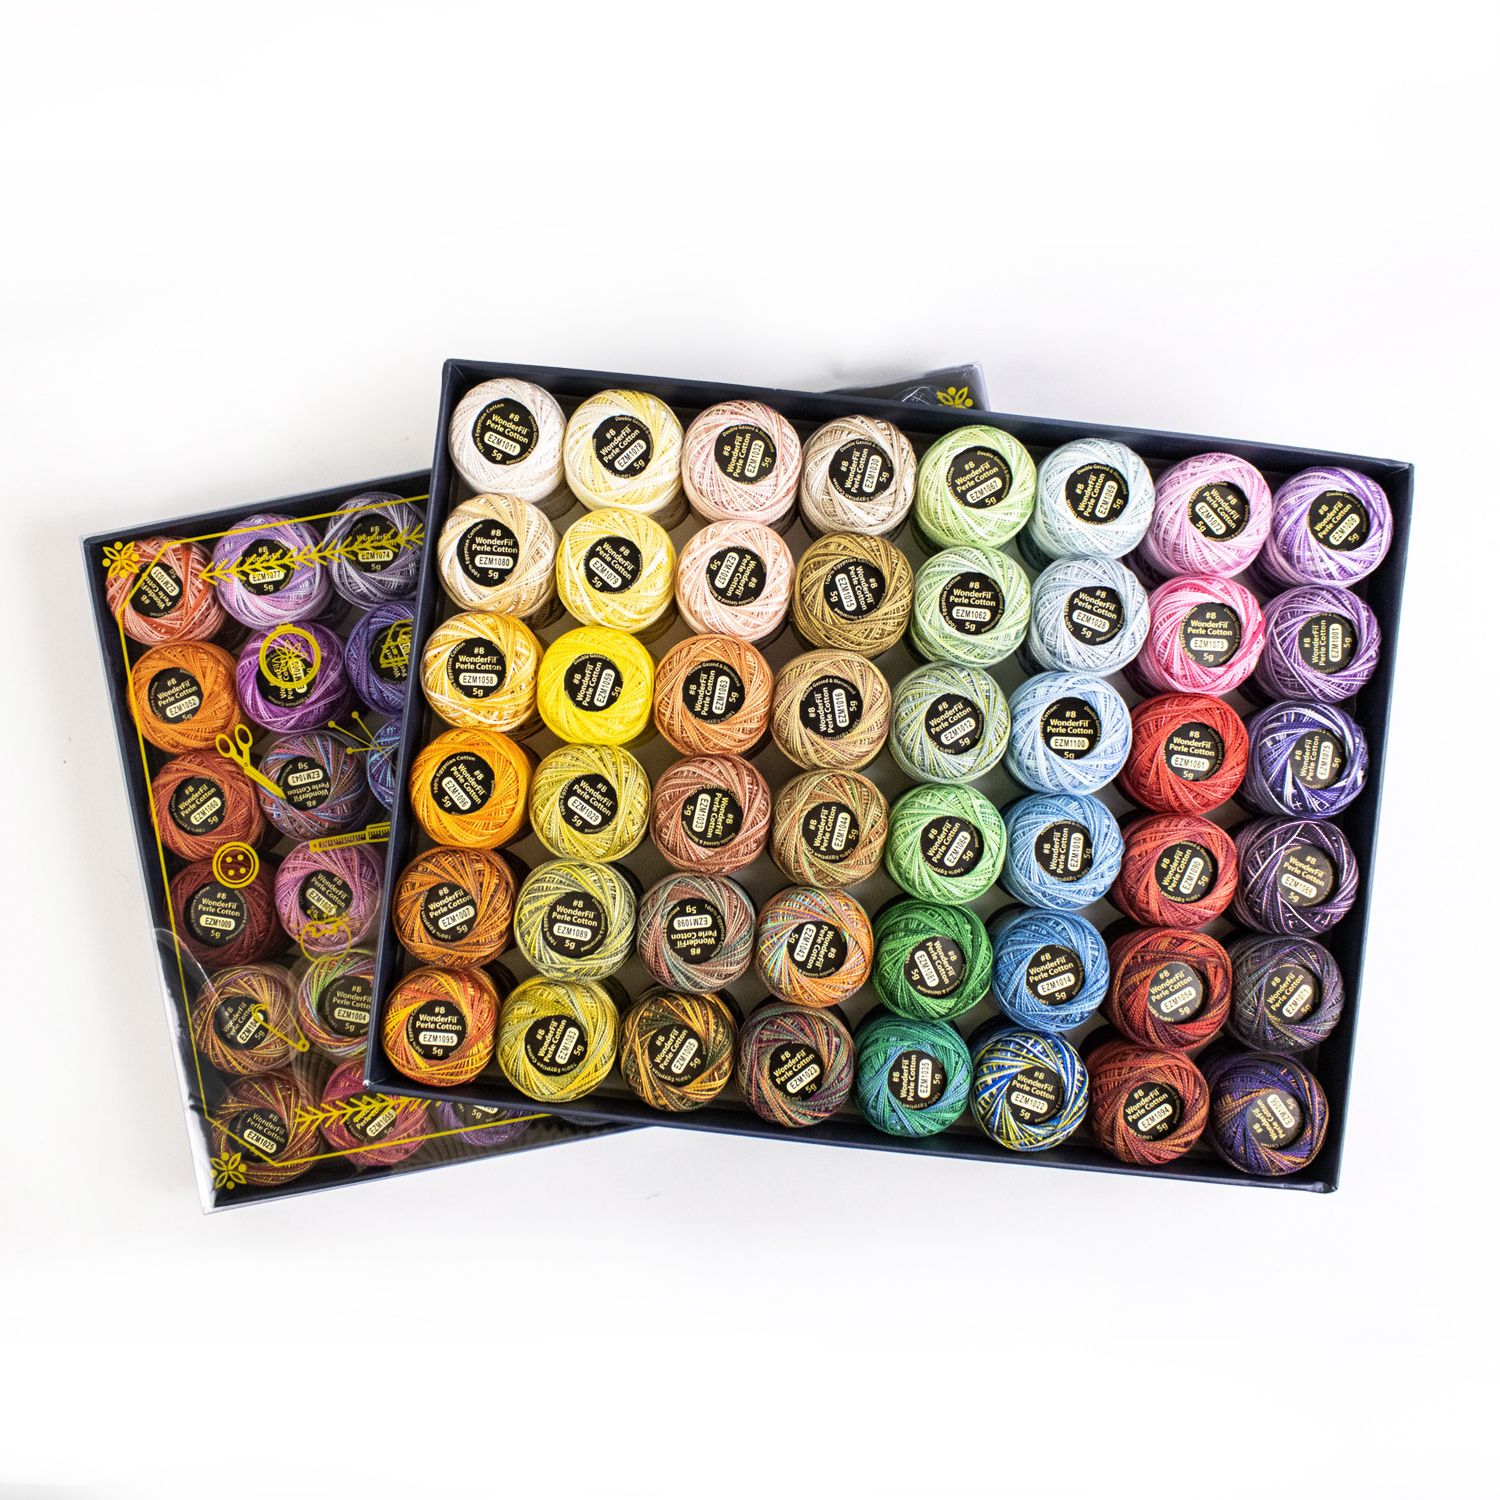 Comparing Hand Embroidery Thread Weights: 12wt, #8, #5, #3 - WonderFil  Specialty Threads USA